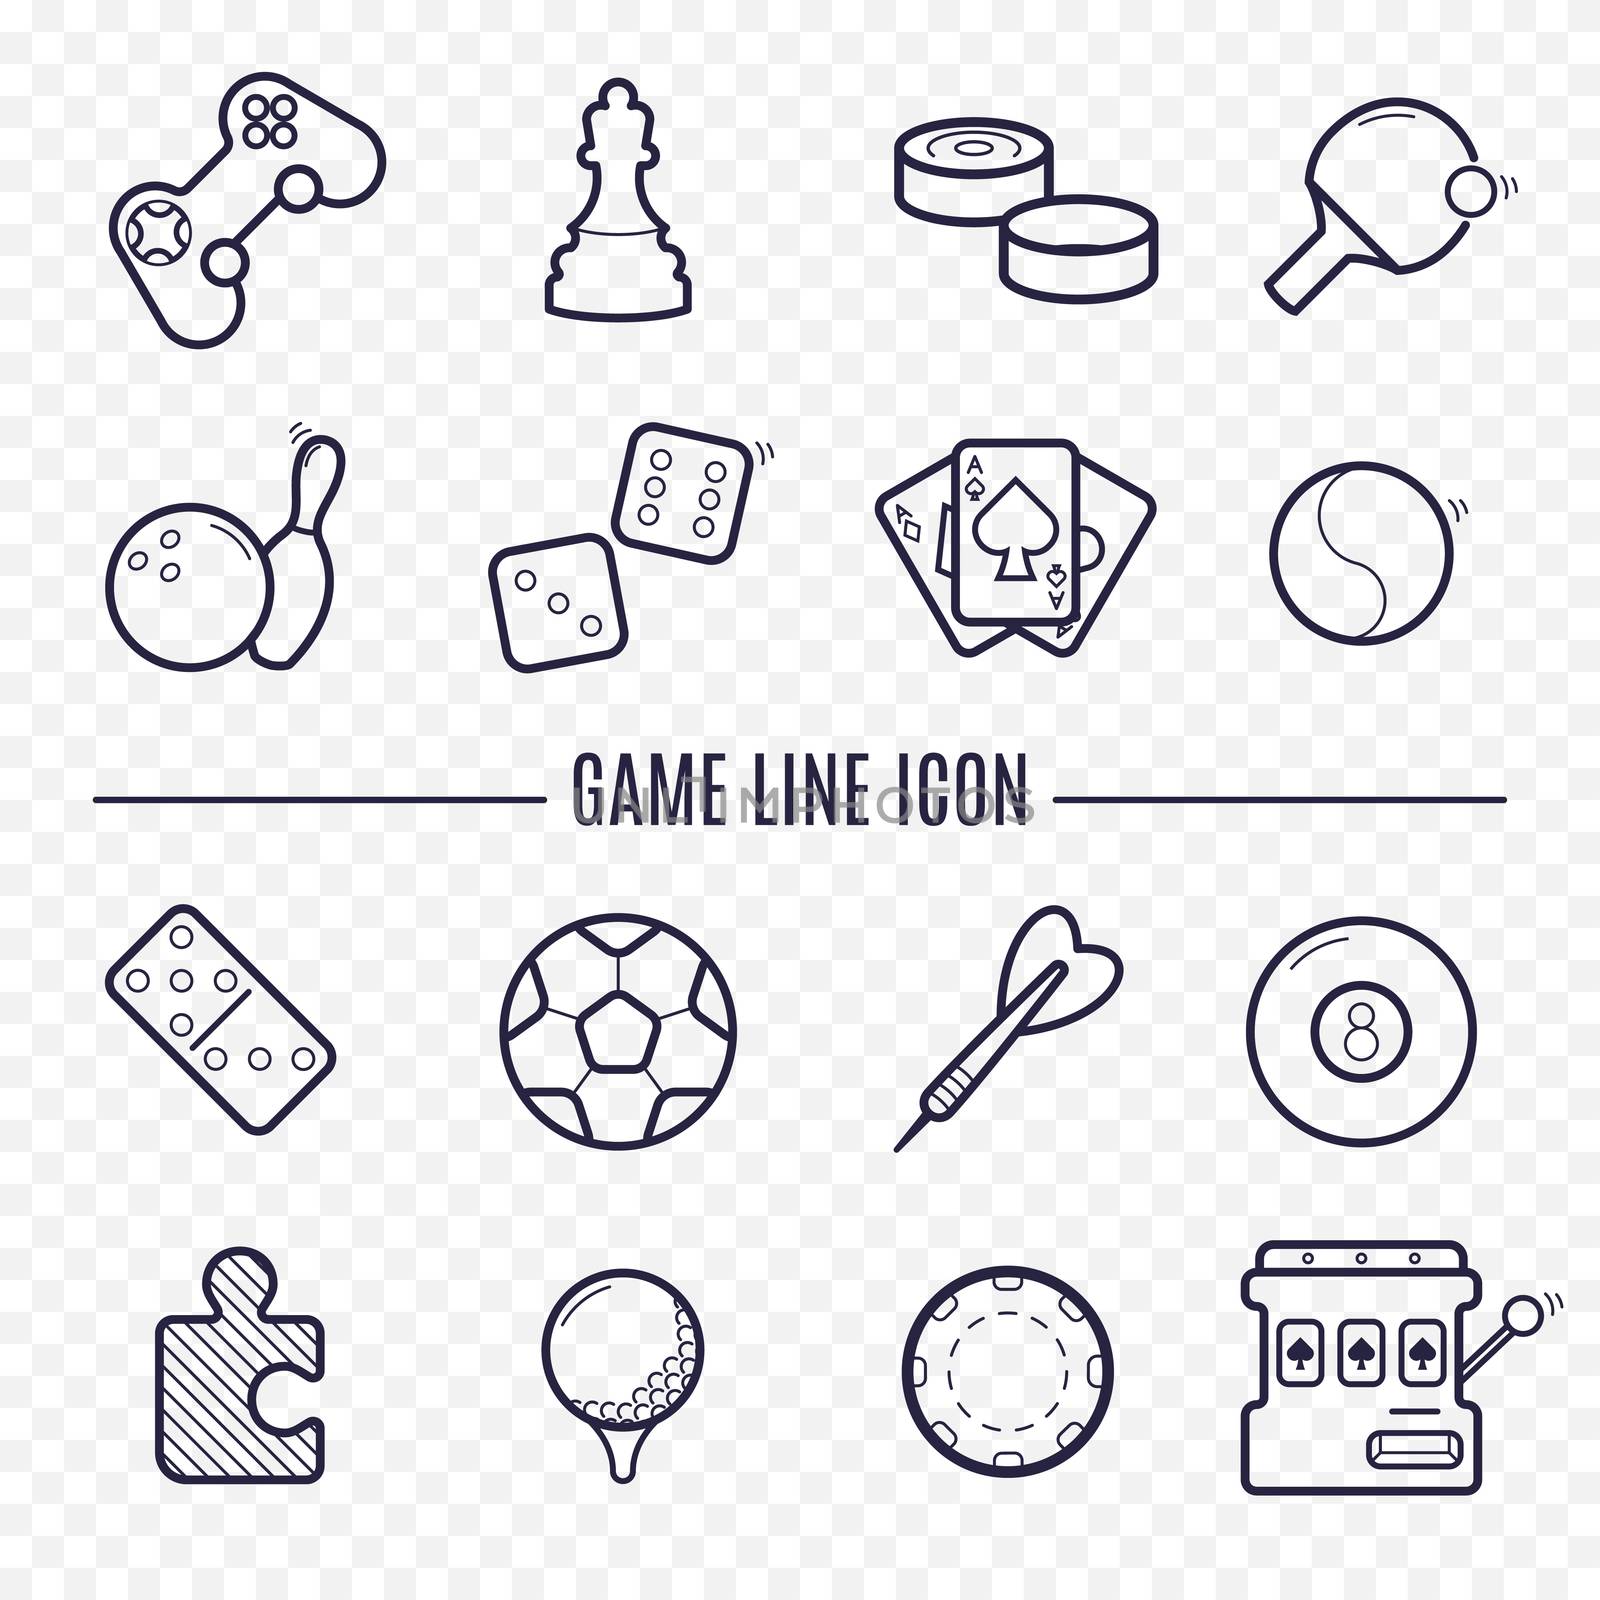 Games, videogames linear icons. Ping-pong, chess, golf, billiards, darts, gambling, bowling and other leisure activities. Logic, gambling, sports thin line icons.